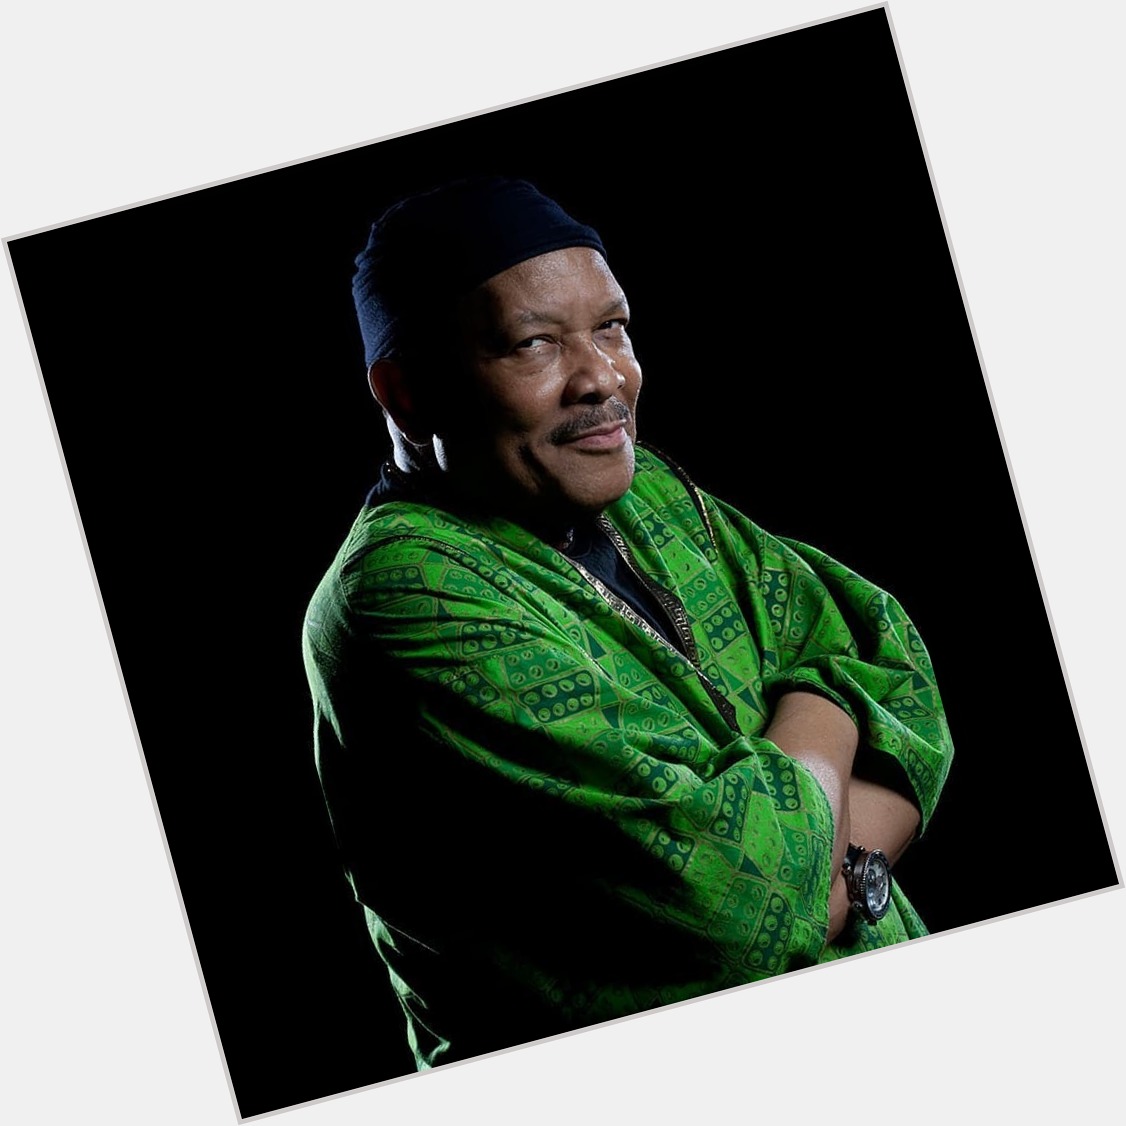 Happy birthday, Roy Ayers.  Going to go listen to that crucial RAMP album.  